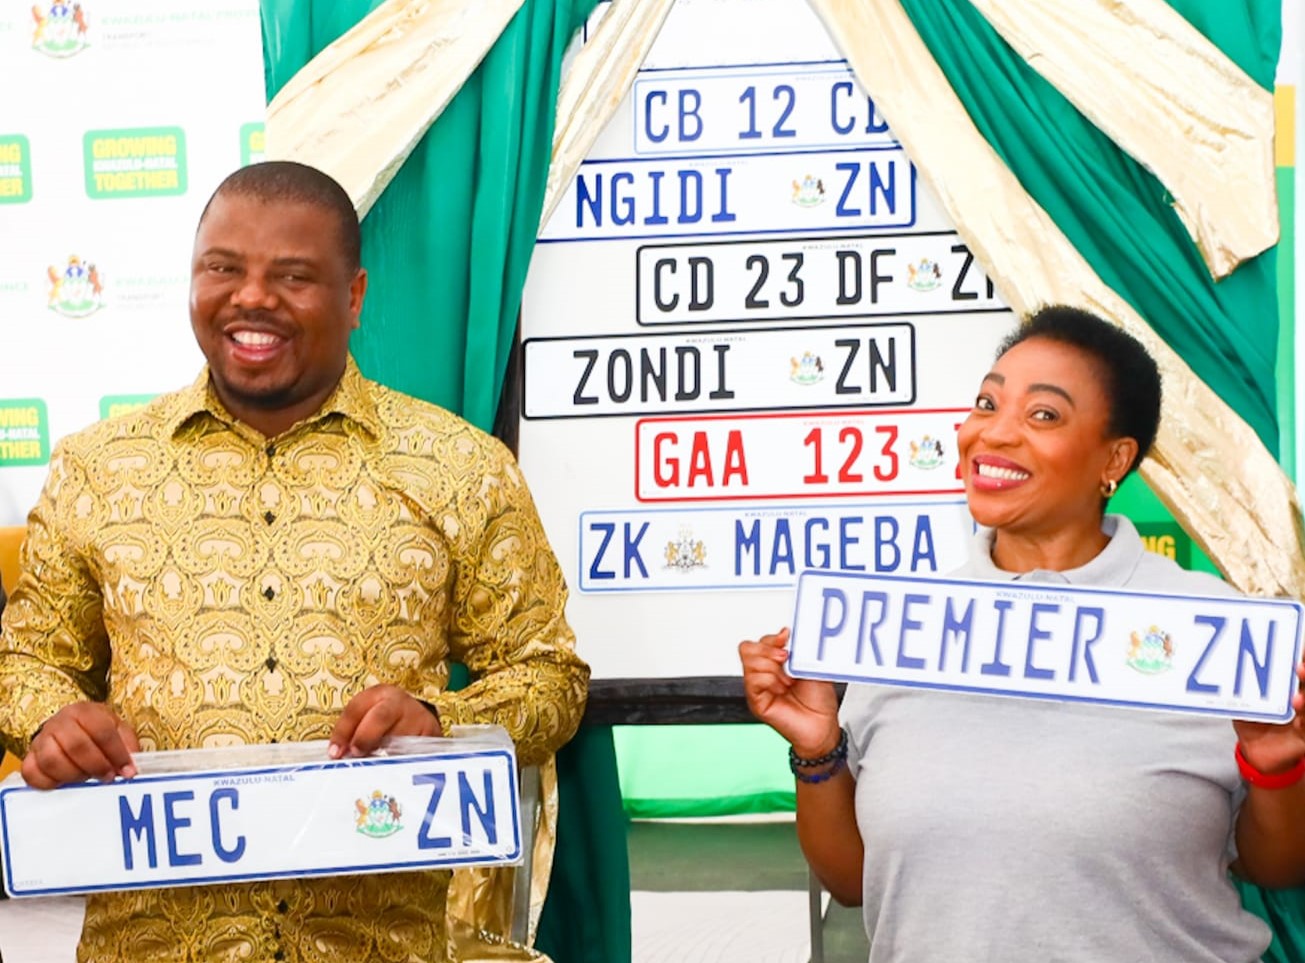 kwazulu-natal, number plate, kwazulu-natal’s new number plates officially launched – here’s what they look like